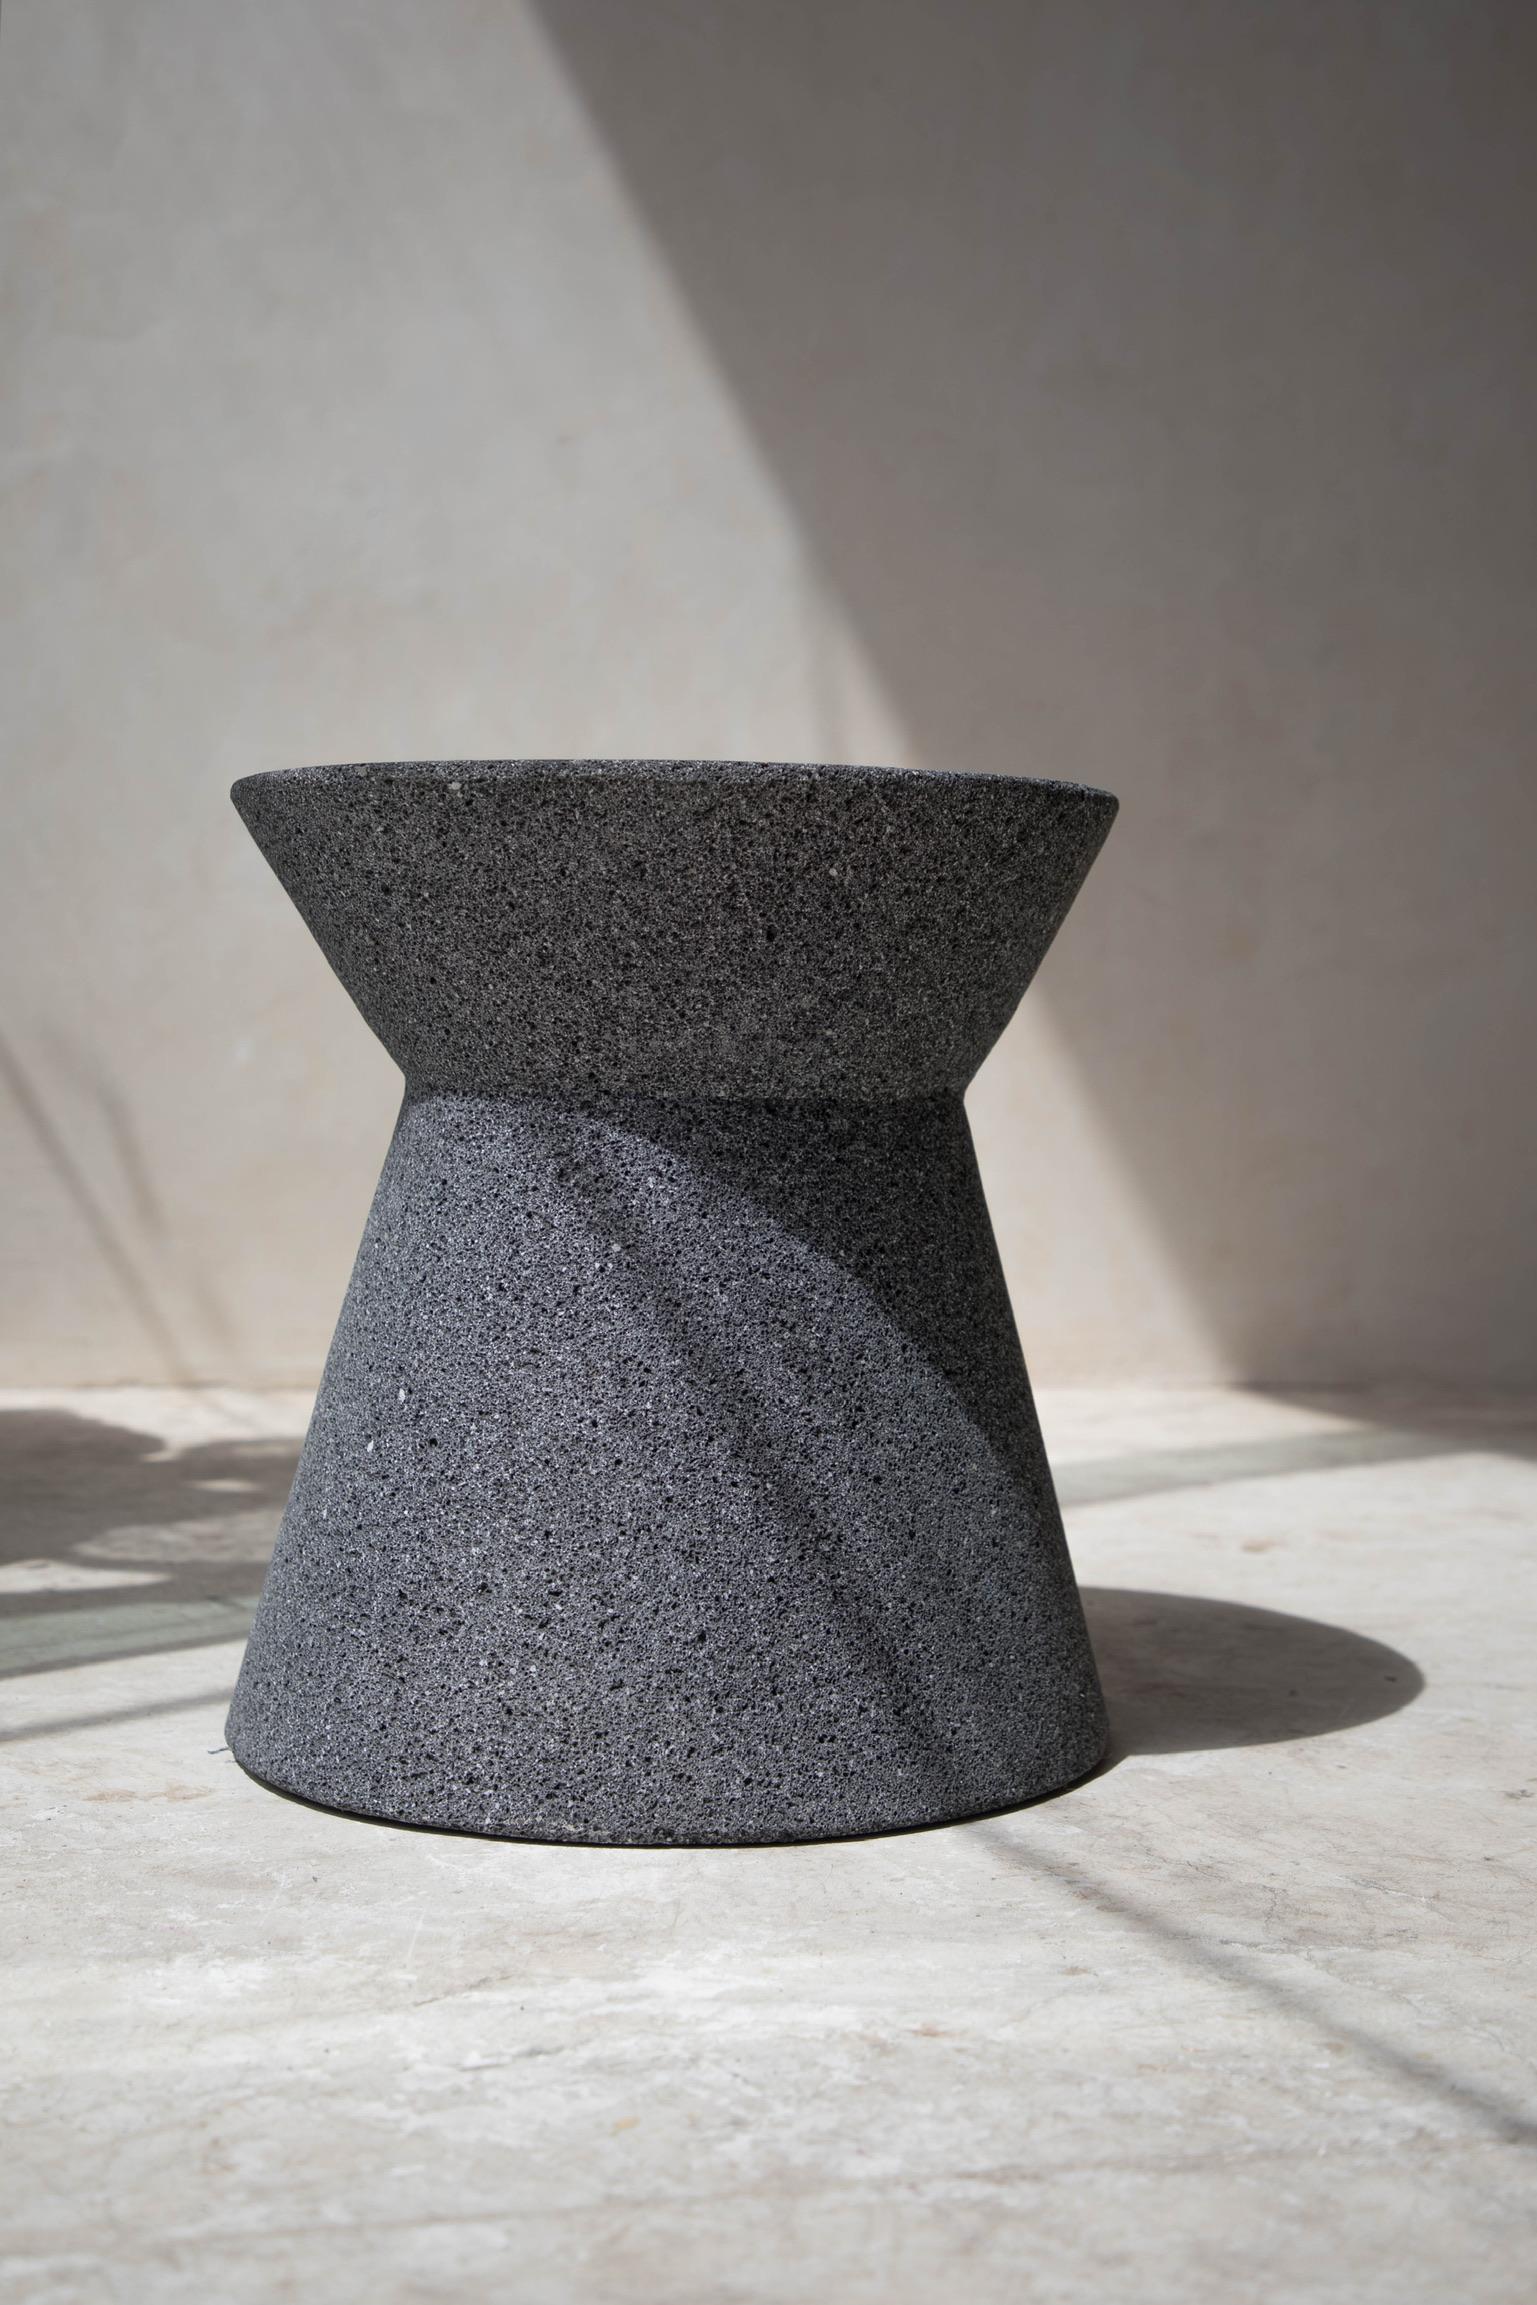 Stone totem 09 by Daniel Orozco
Material: Volcanic rock.
Dimensions: D 35 x H 45 cm

Volvanic rock Totem.

Daniel Orozco Estudio
We are an inclusive interior design estudio, who love to work with fabrics and natural textiles in makes our